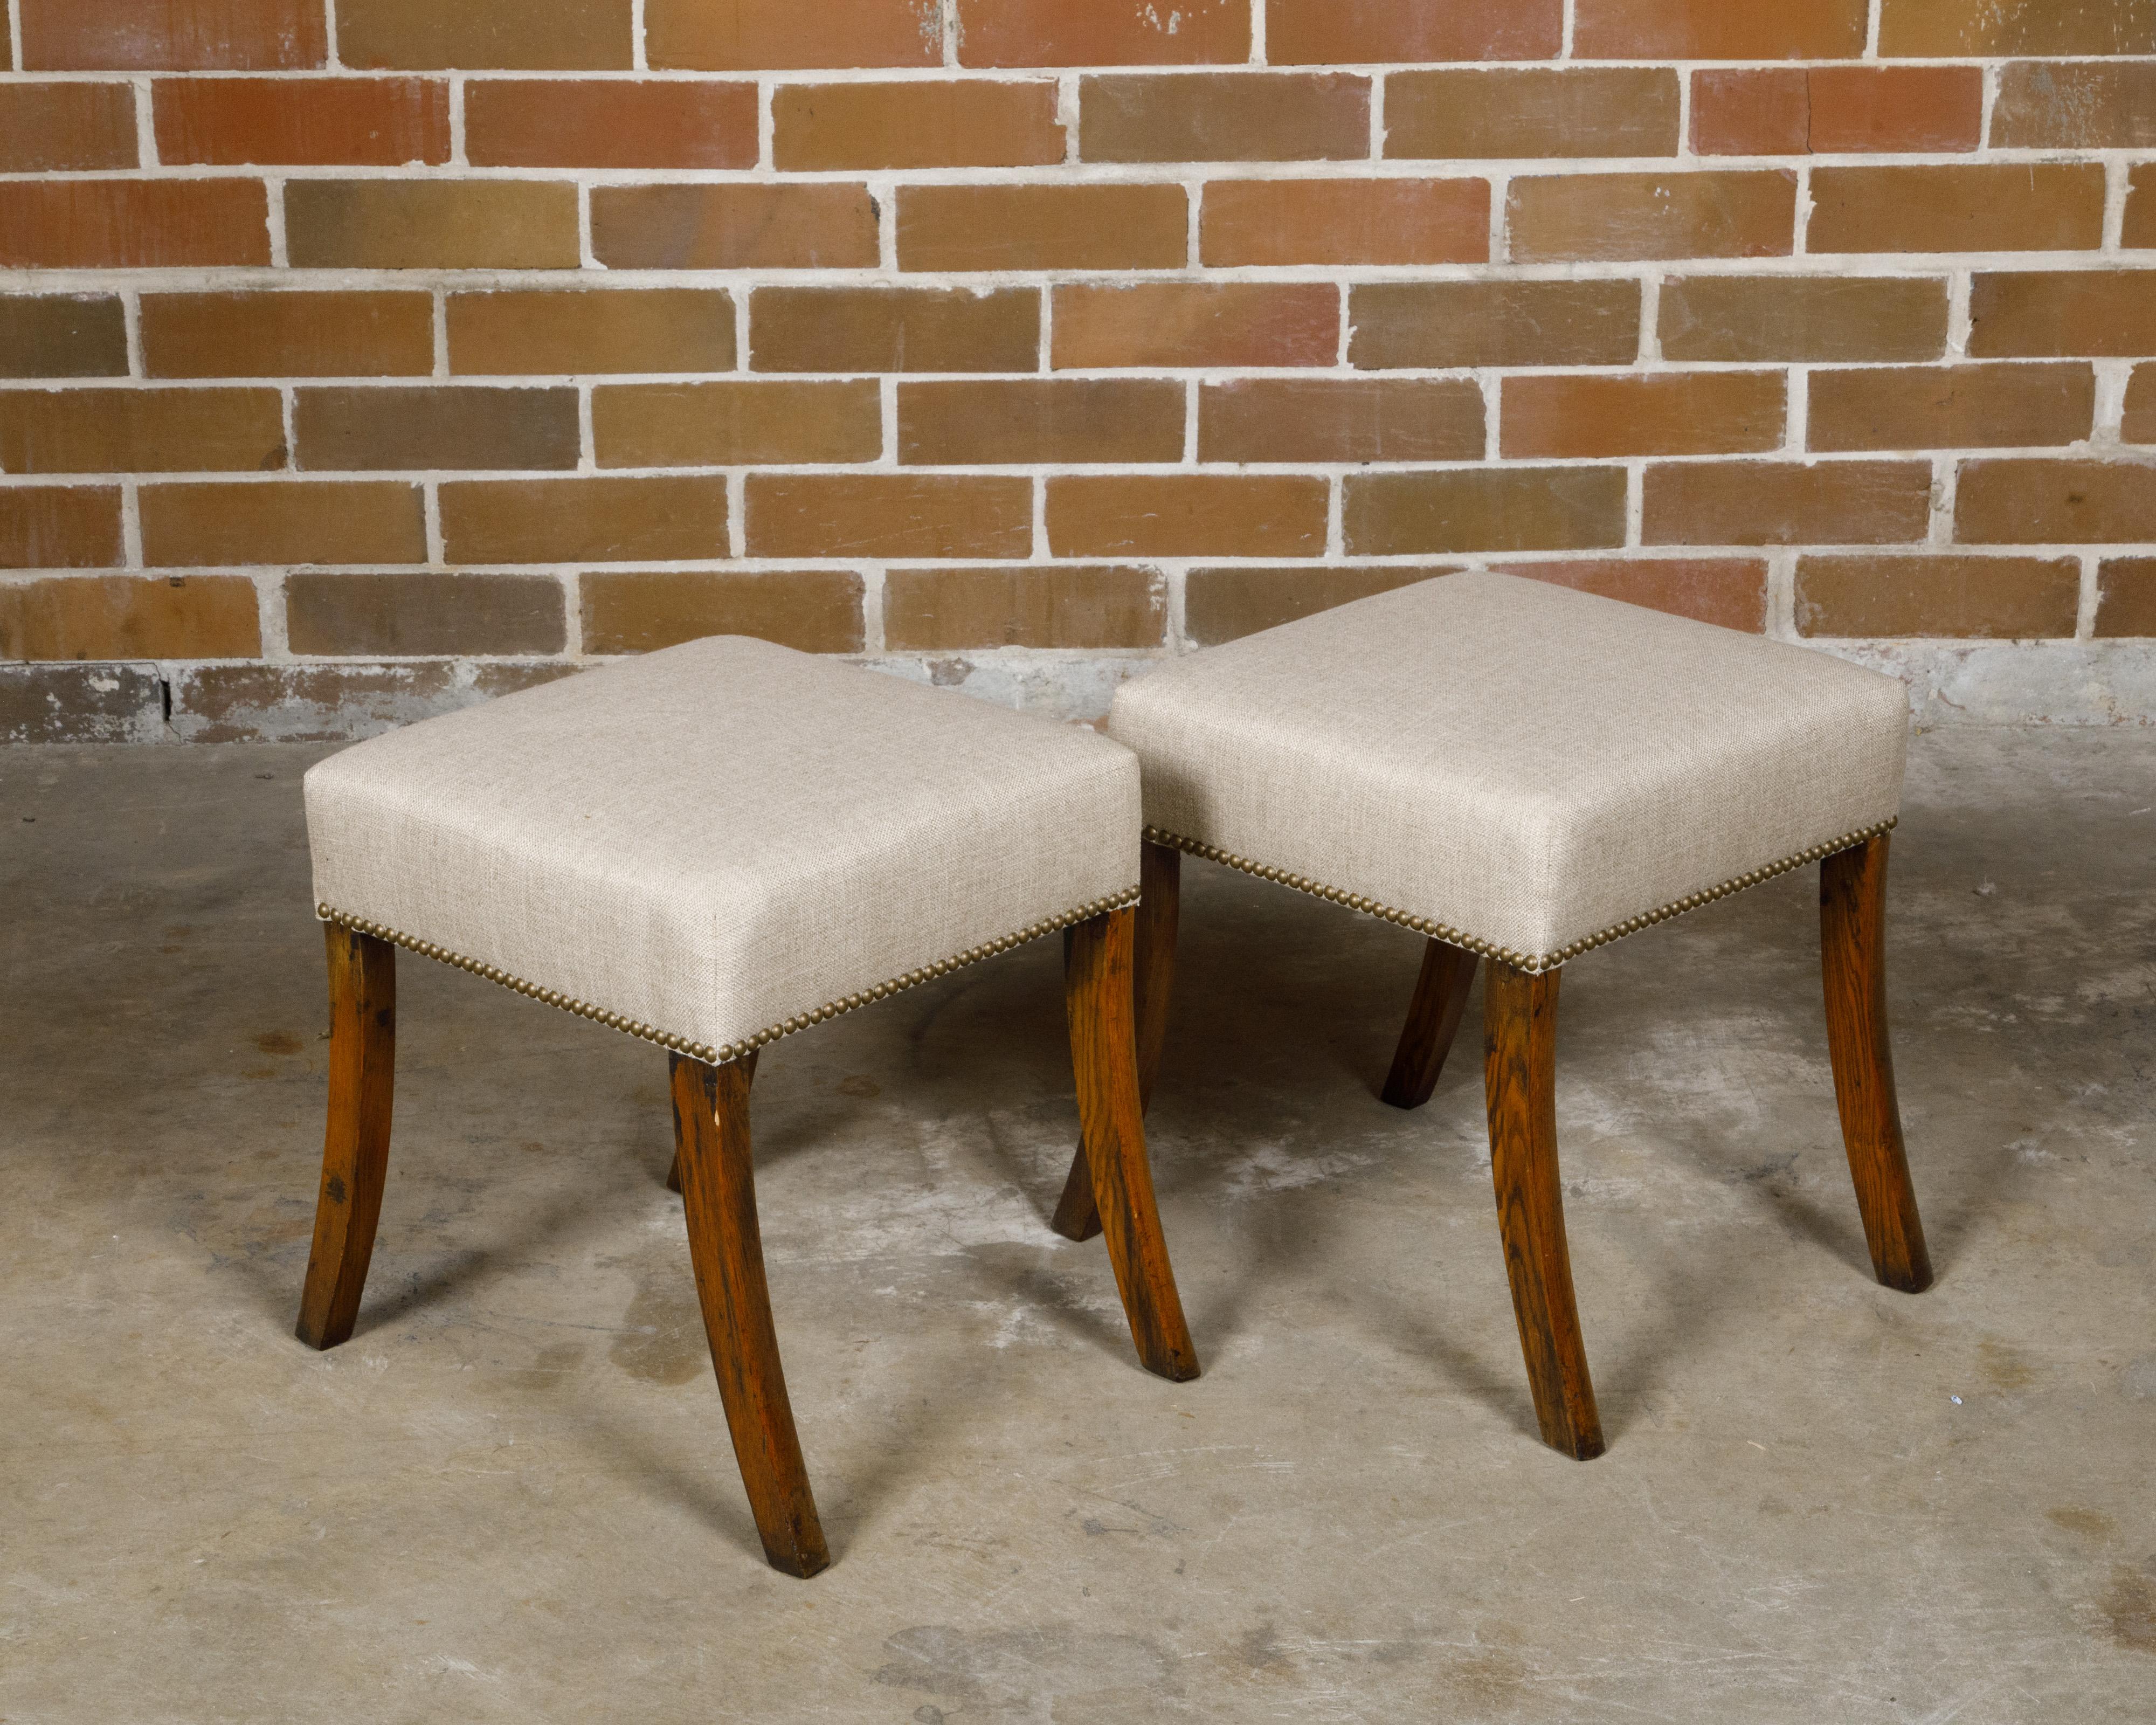 Pair of English 19th Century Oak Stools with Saber Legs and Custom Upholstery For Sale 1